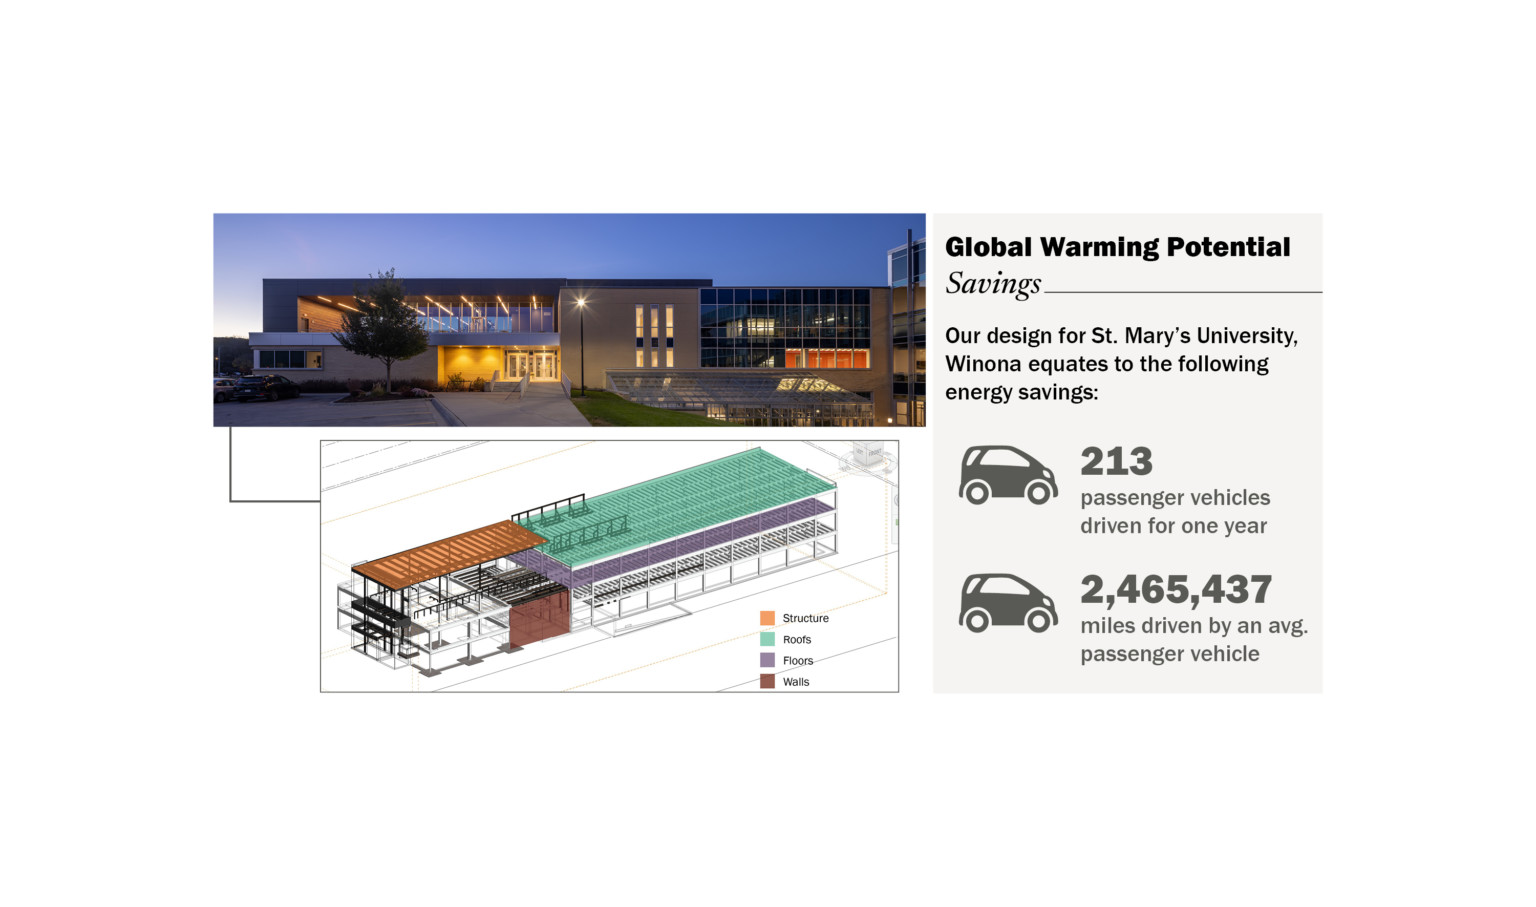 Saint Mary's University Winona Global Warming Potential Savings equal to 213 passenger vehicles driven for one year